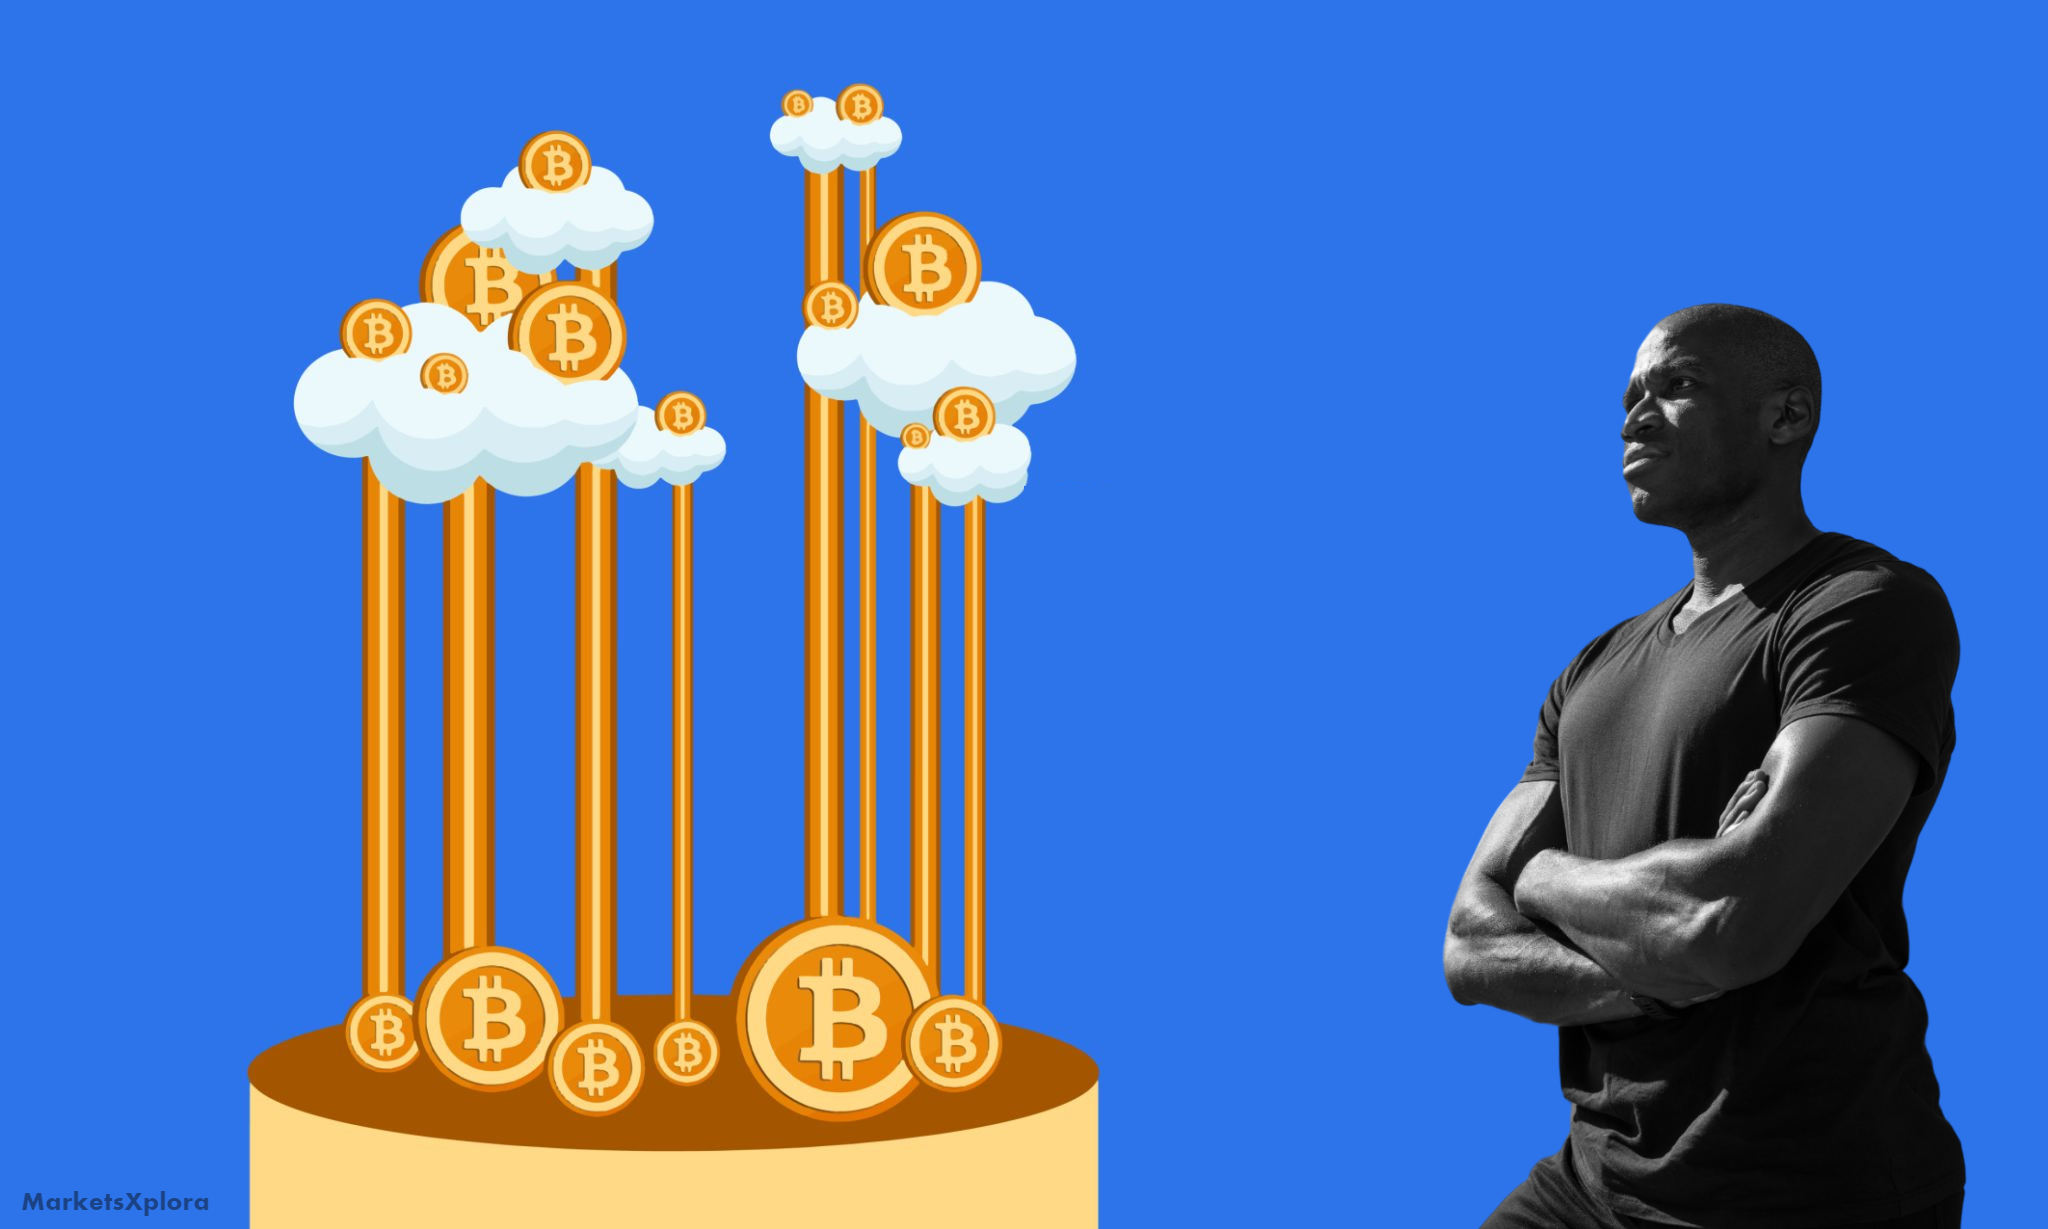 Arthur Hayes, former BitMEX CEO, predicts bitcoin will rally back to $60,000 before ranging between $60,000-$70,000 until August on improving liquidity.